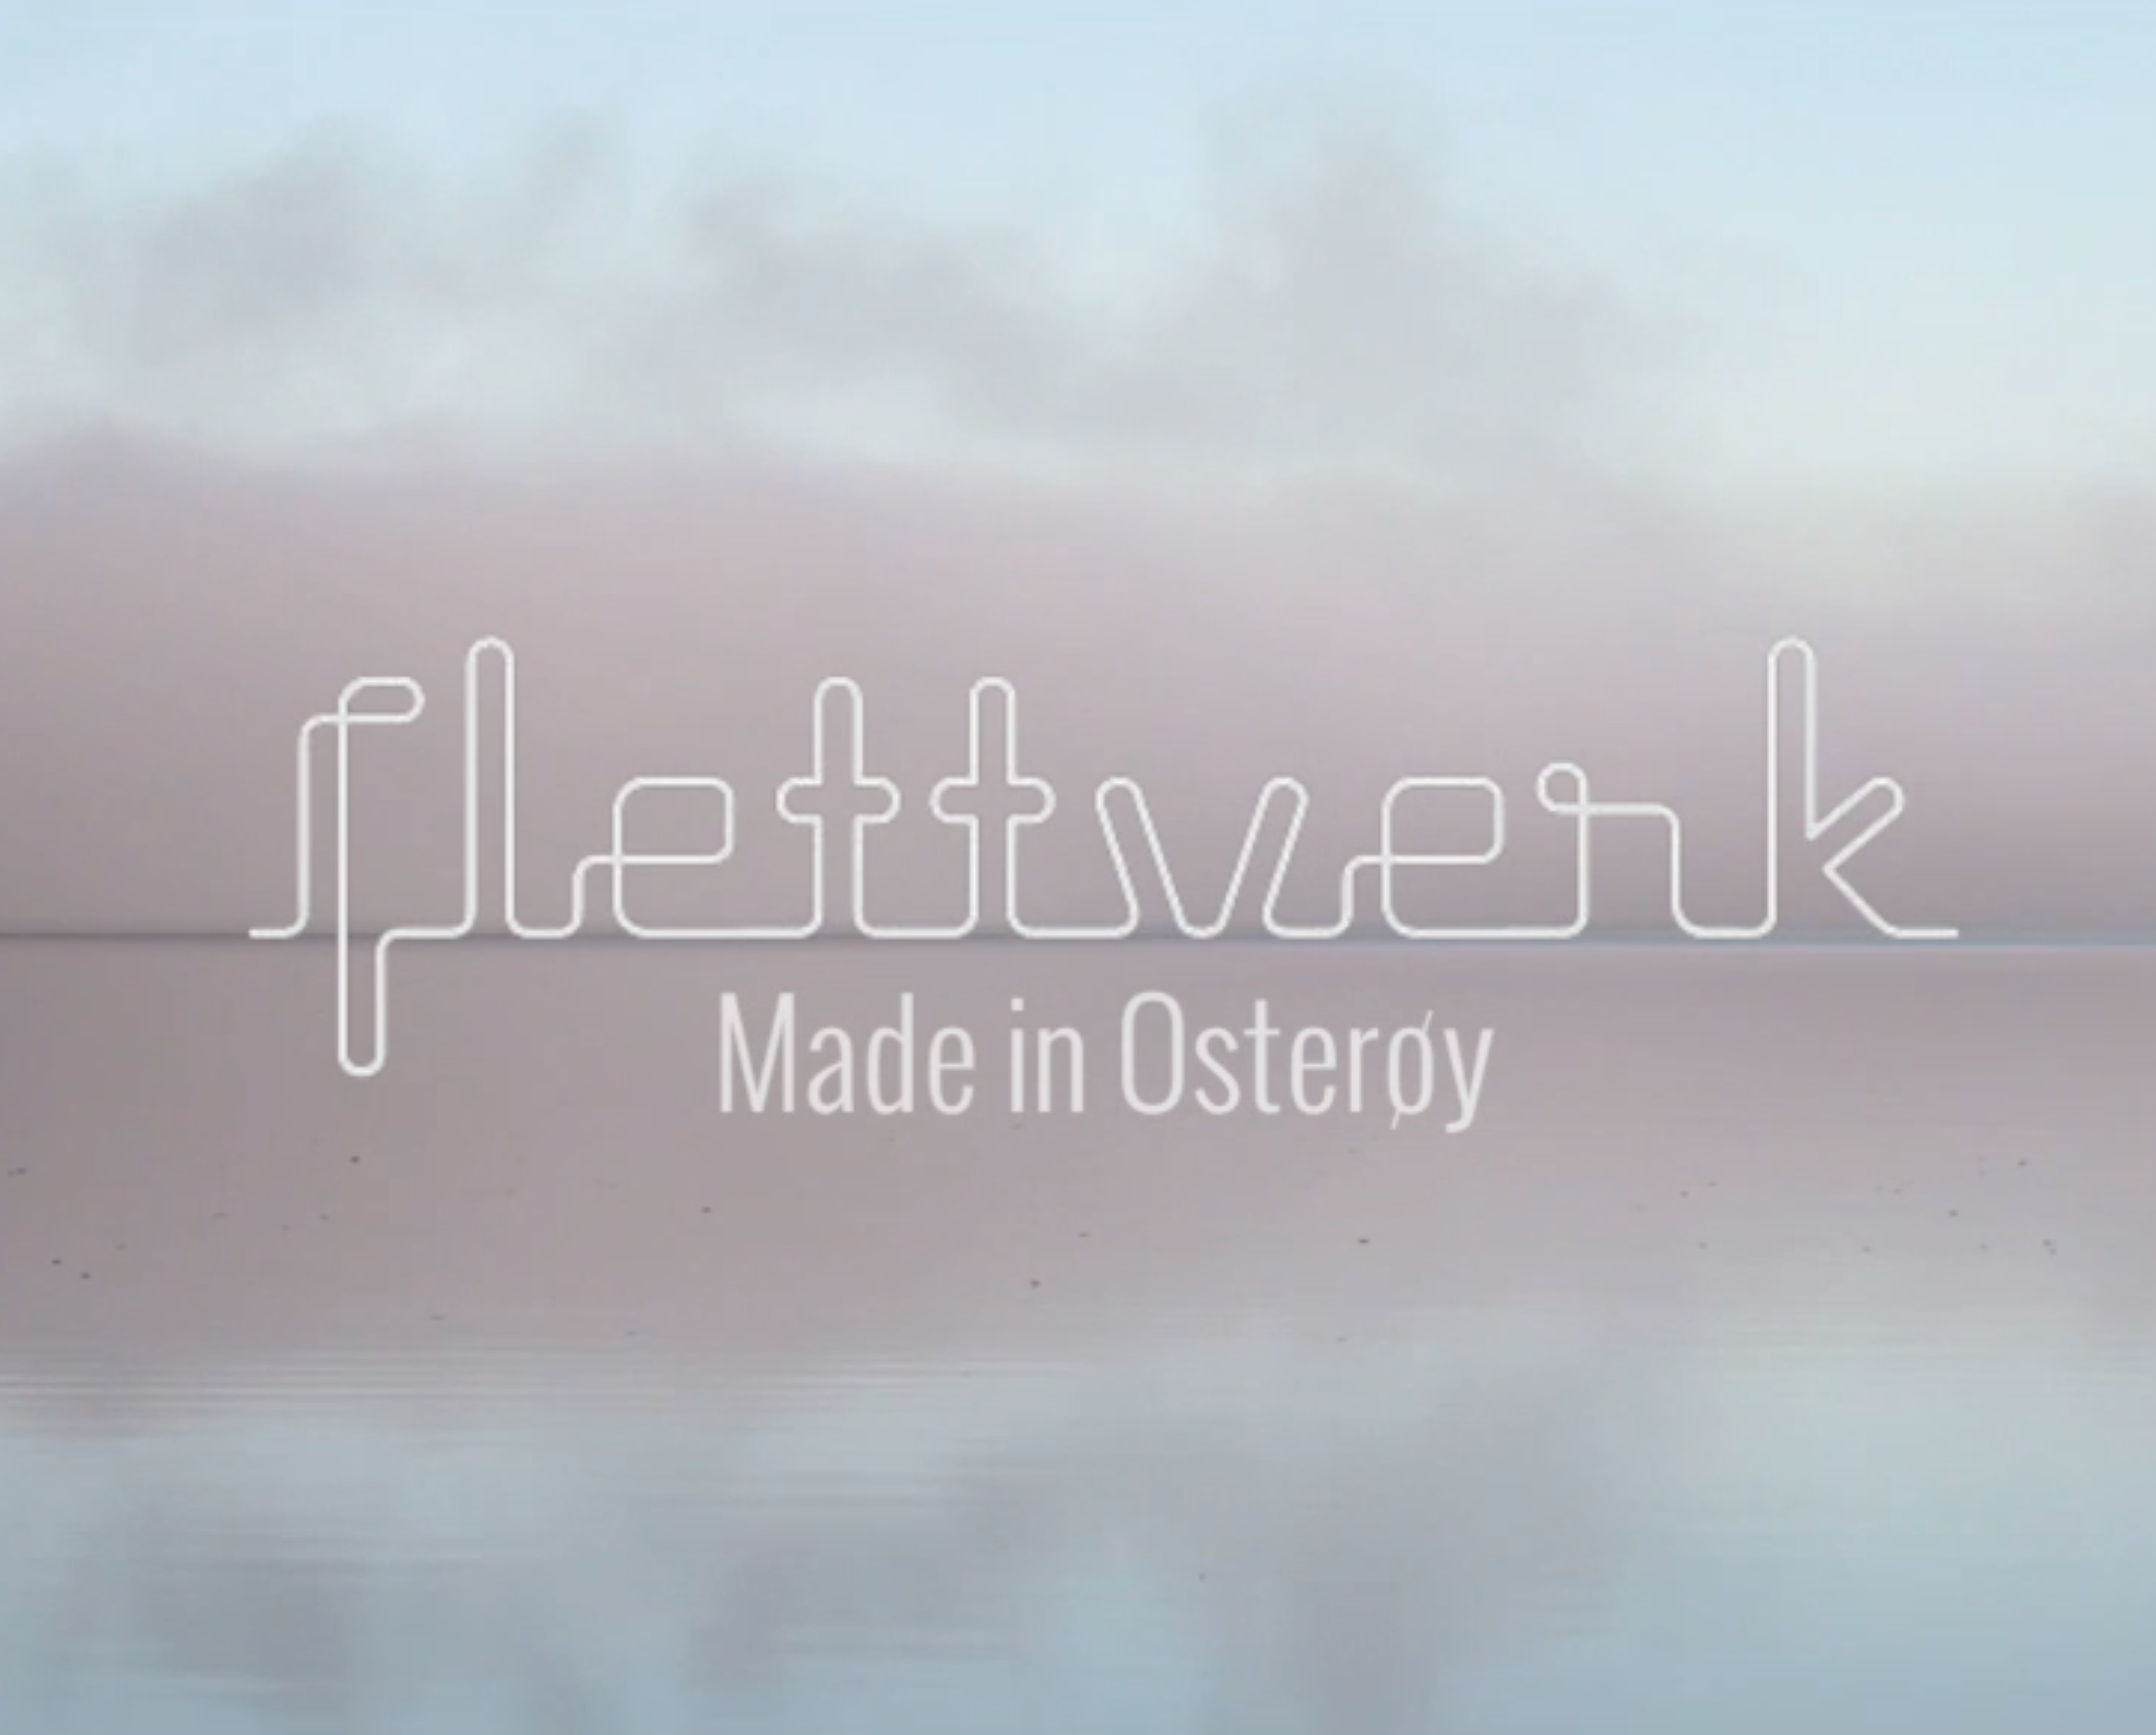 2013 "Made in Osteroy" Project Video